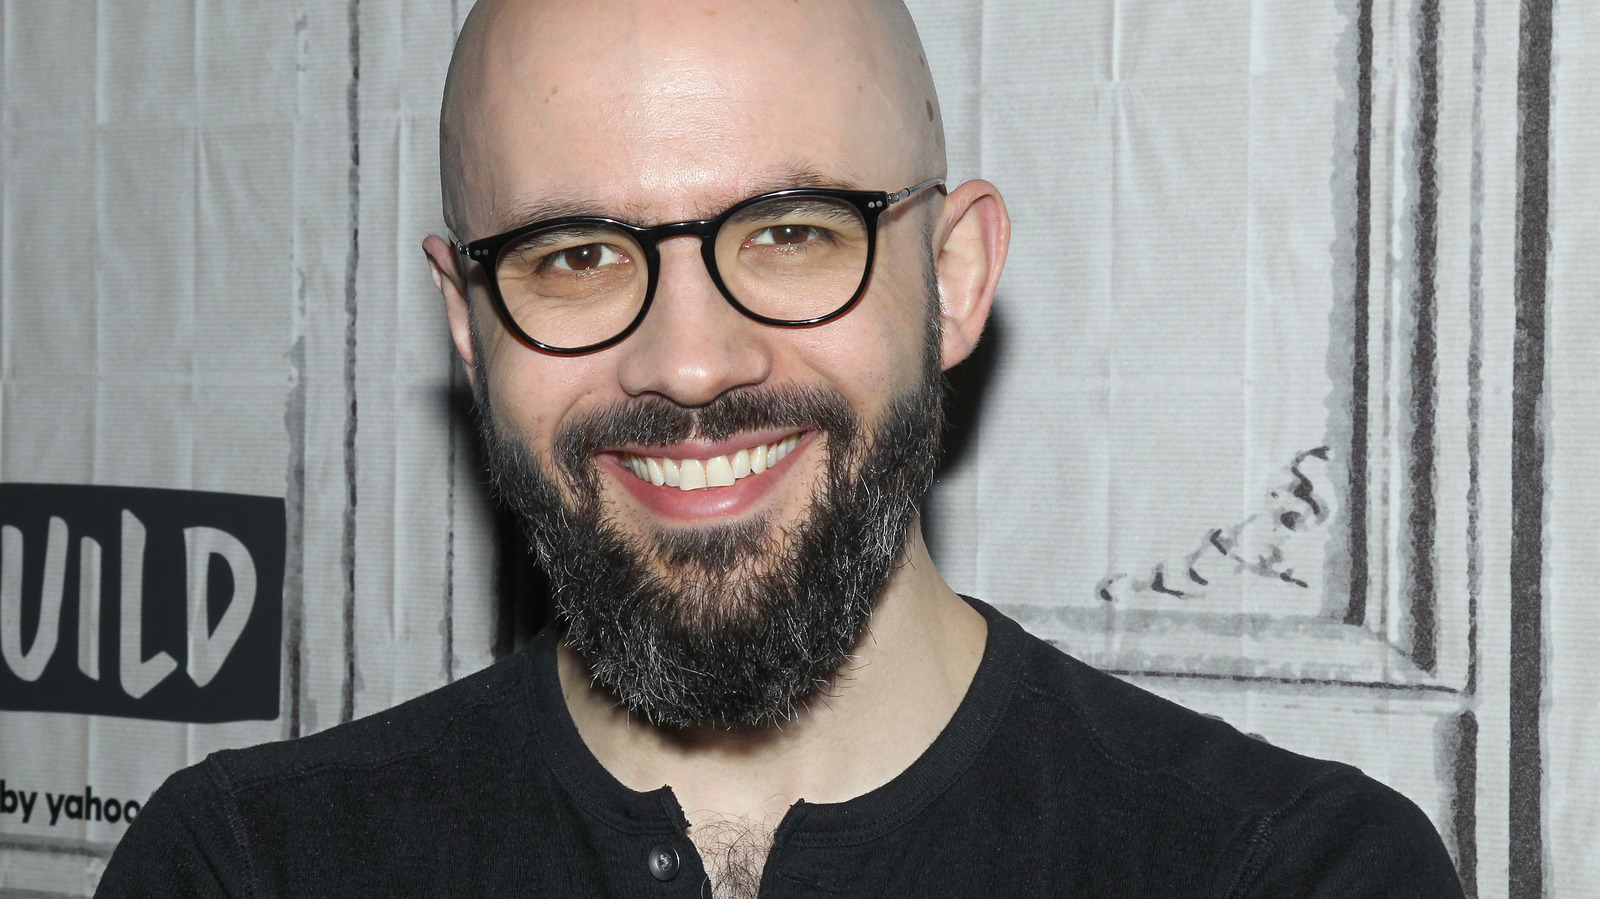 https://www.mashed.com/img/gallery/andrew-rea-tells-us-what-fans-can-expect-from-his-babish-cookware-launch-with-walmart-exclusive/l-intro-1686092142.jpg